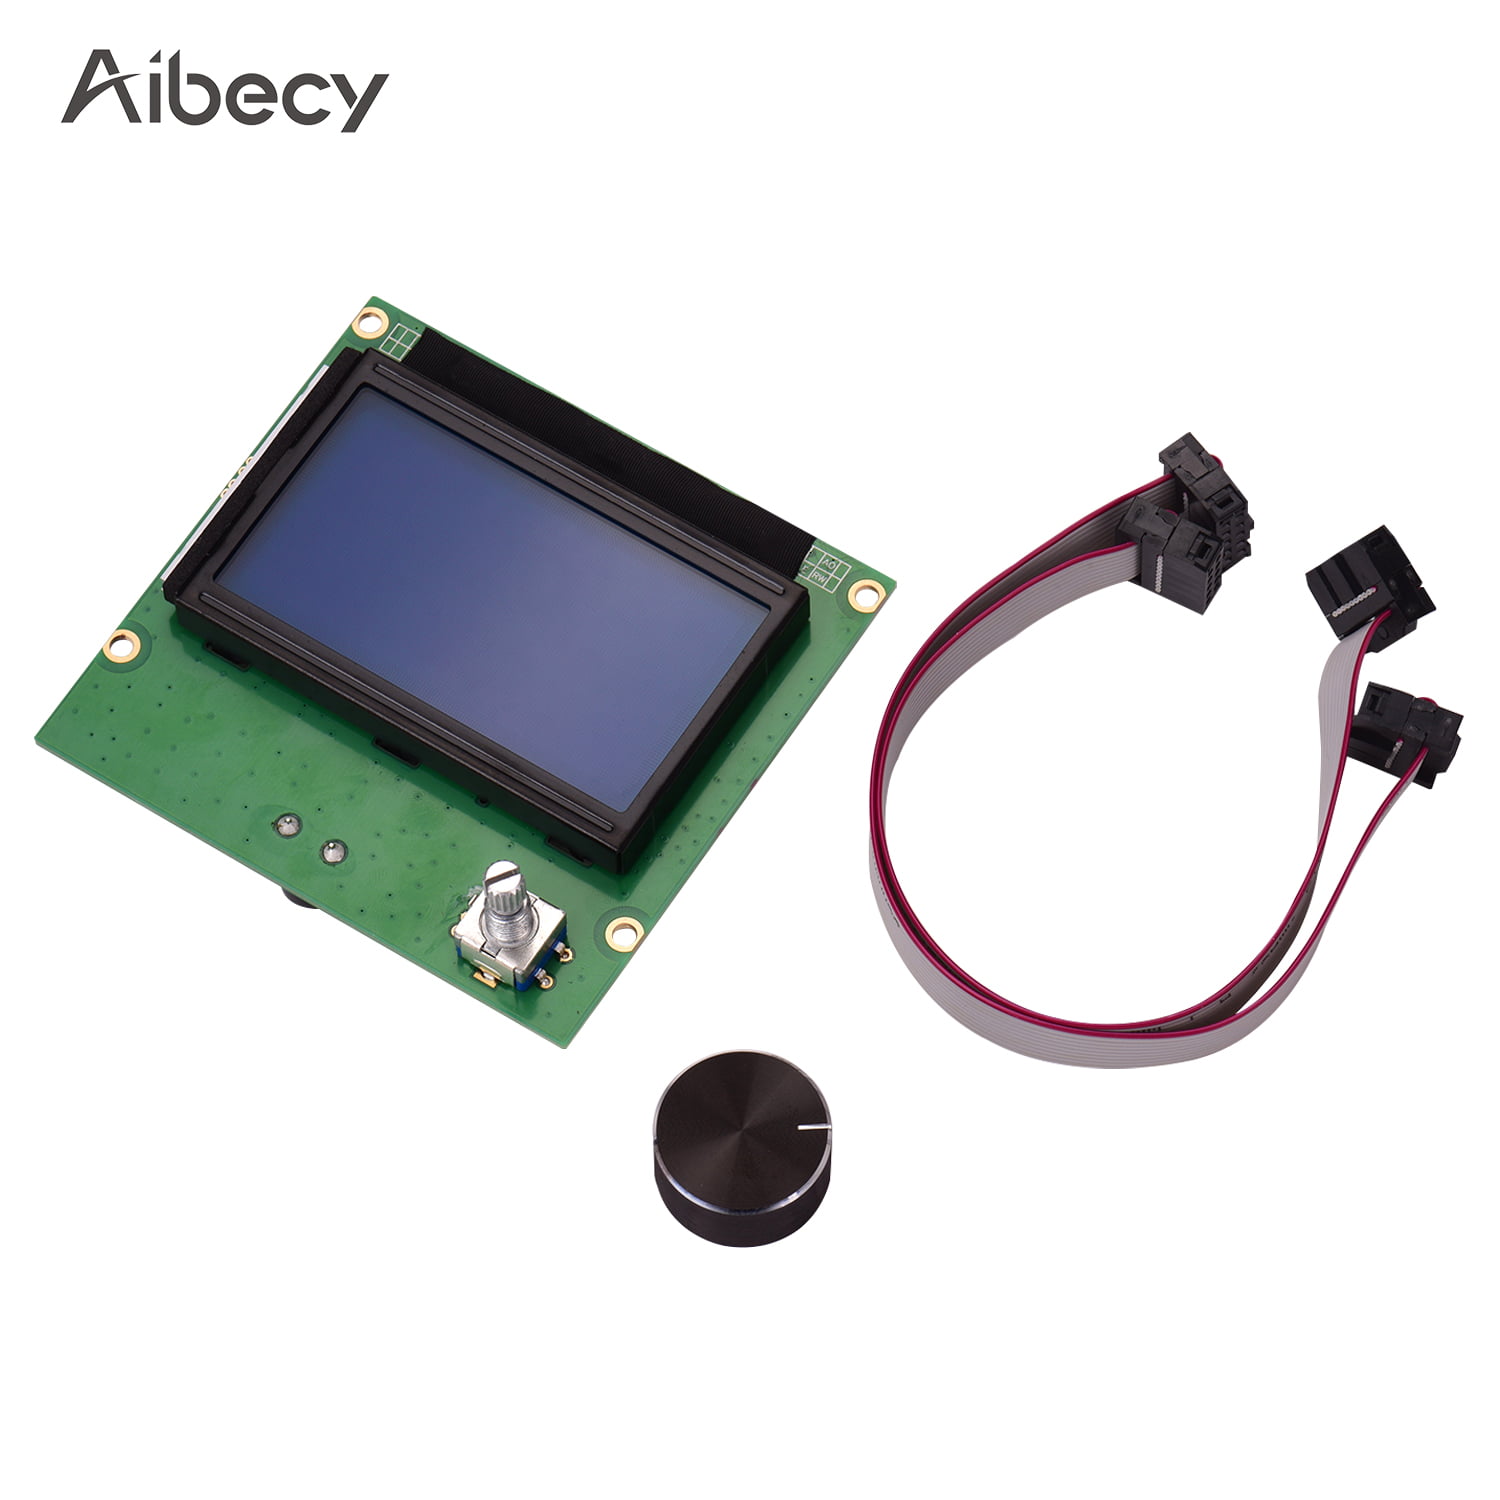 Universal LCD Display Screen Replacement For For Creality CR-10S 3D Printer AM 